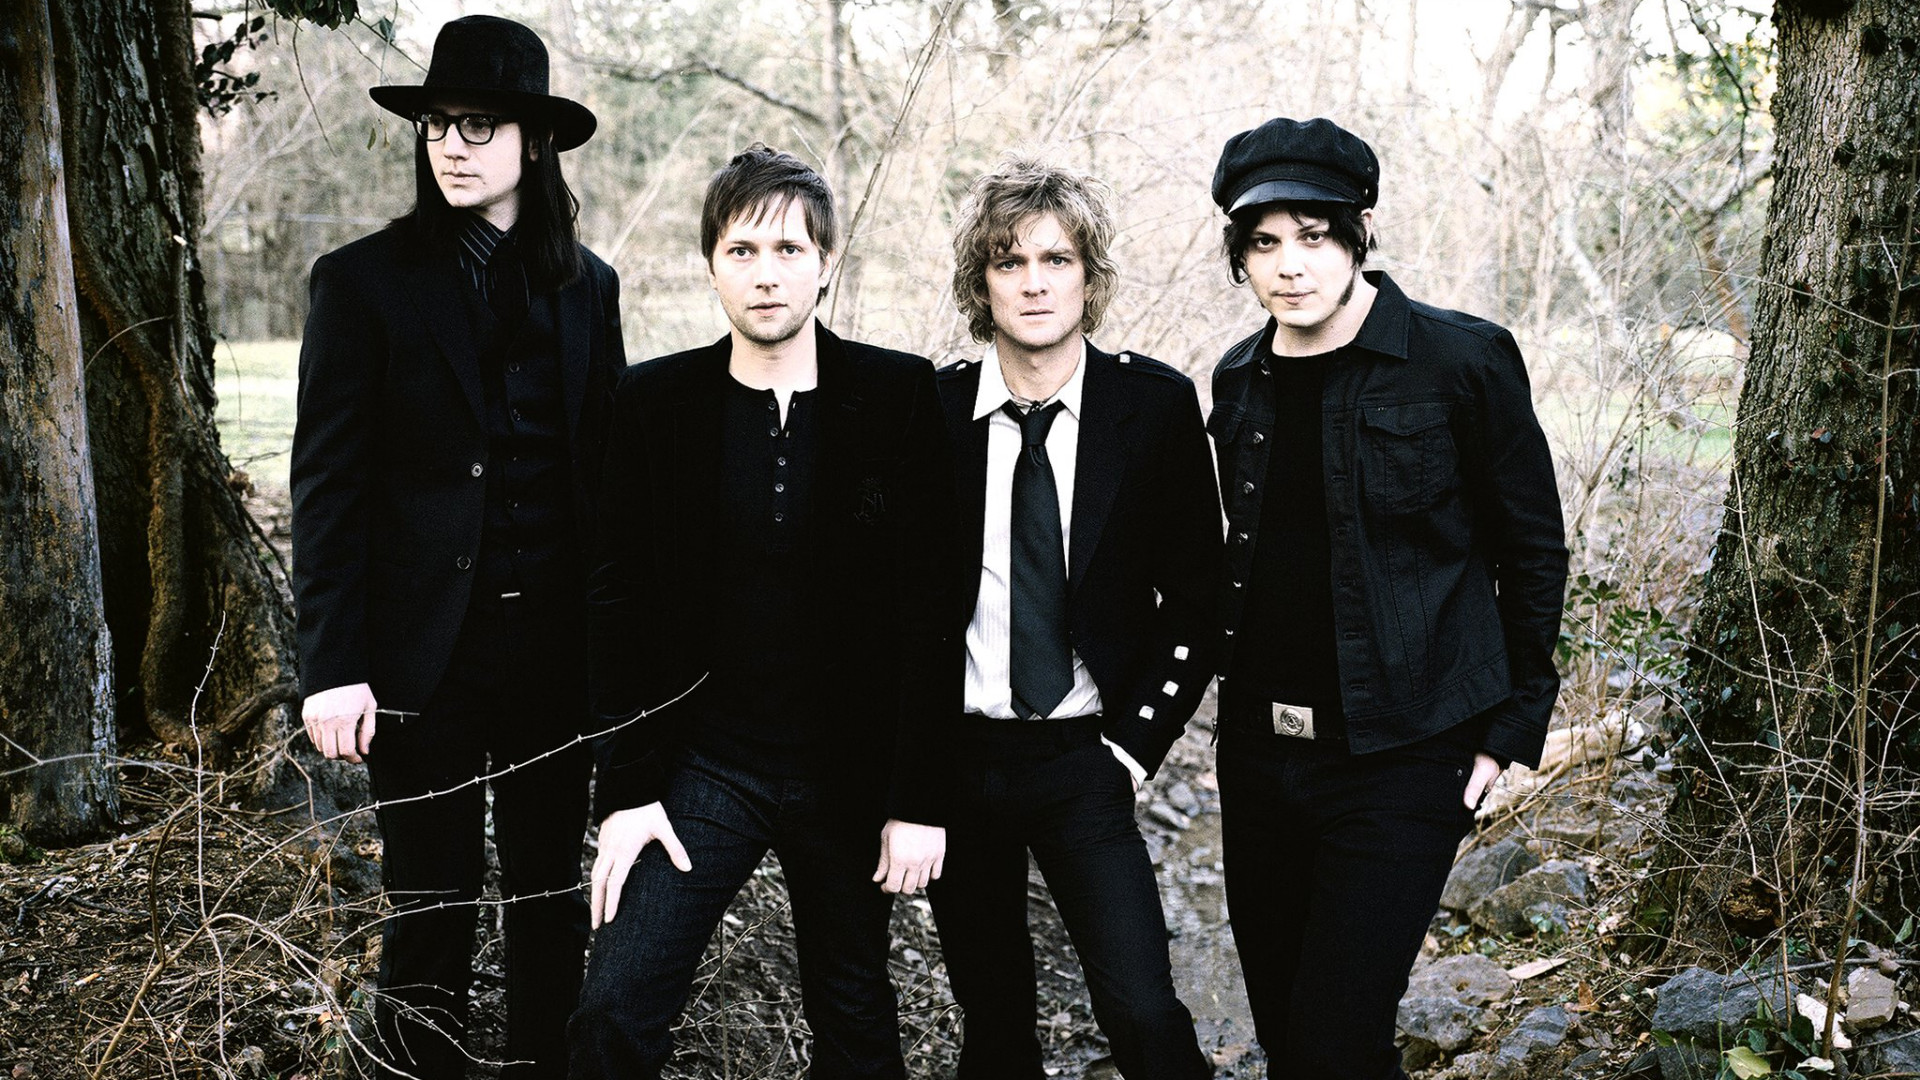 1920x1080 Watch Jack White Reunite With The Raconteurs For The First Time In 3 Years